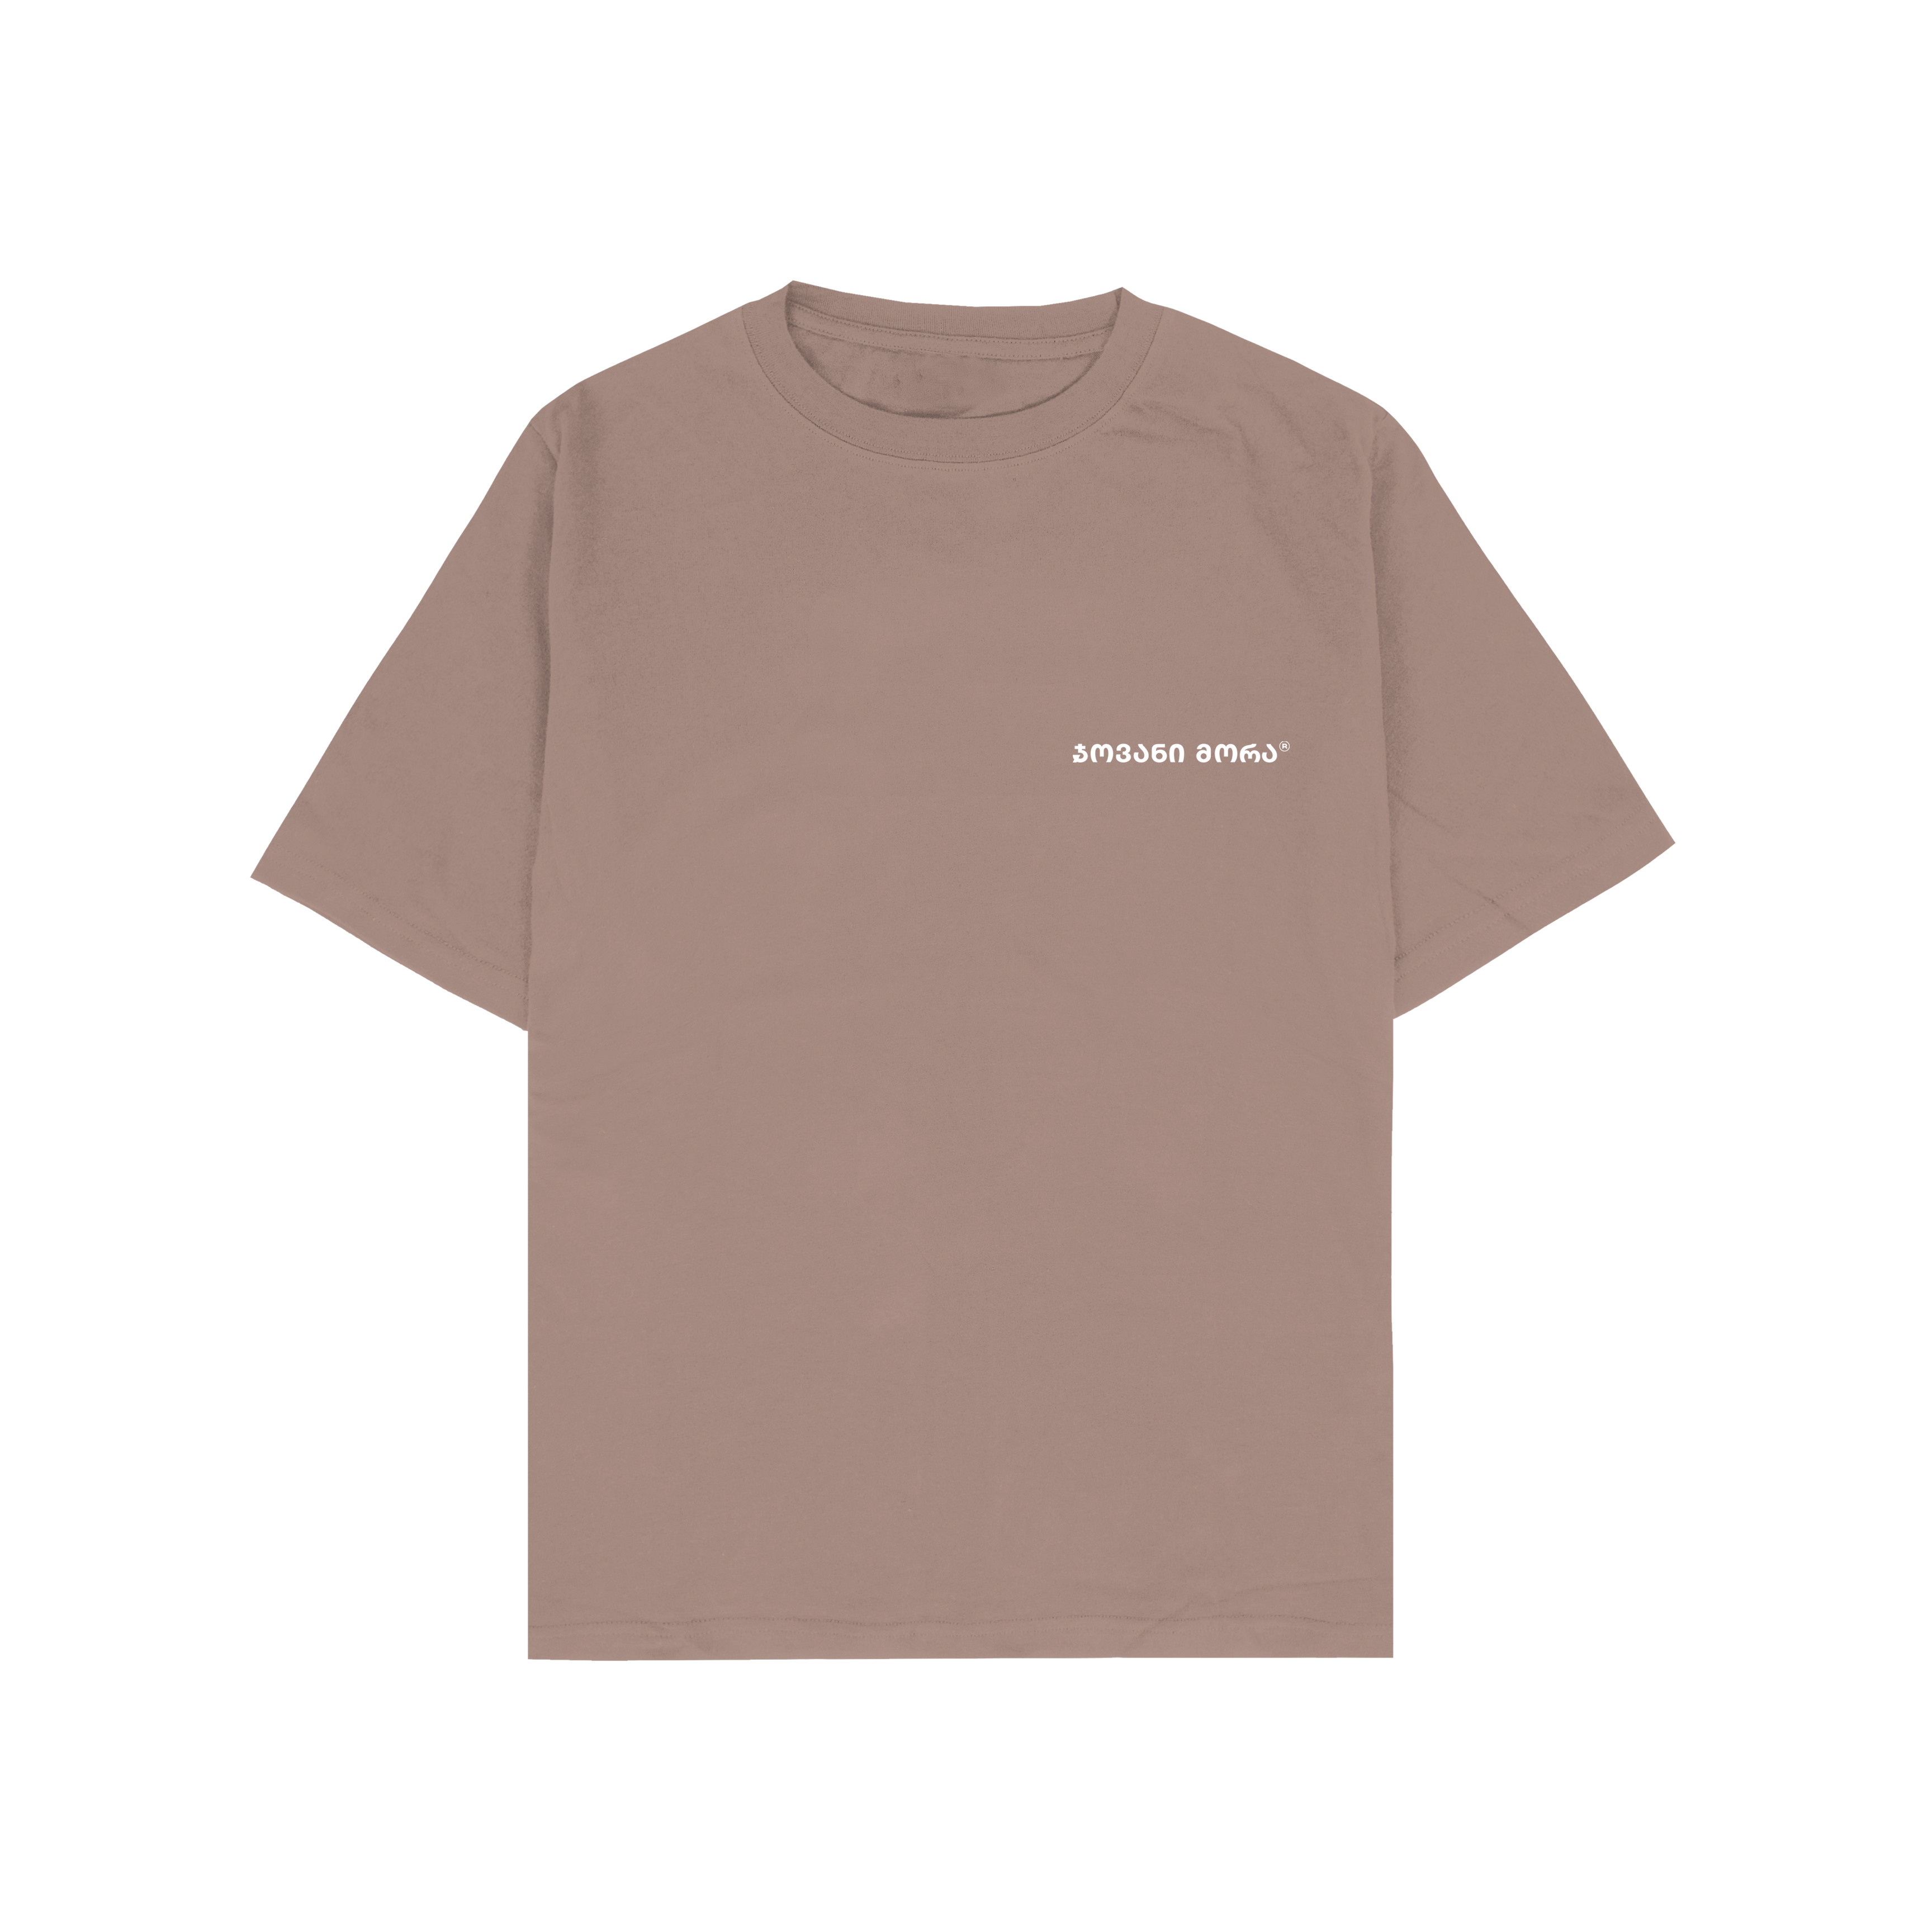 T-shirt (Brown), Relaxed Fit